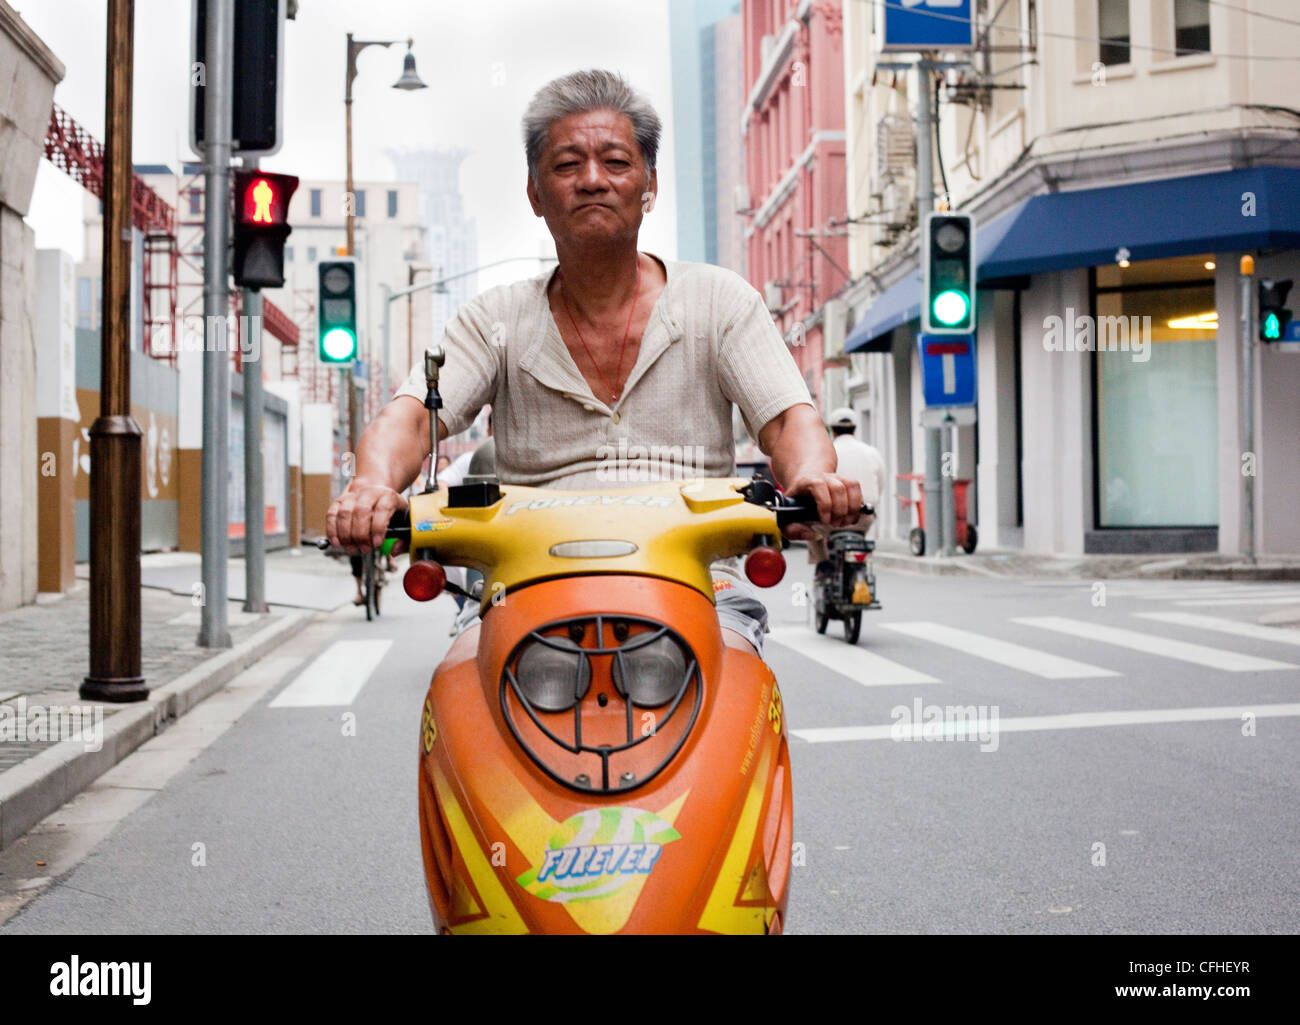 A man motorcycling through the city of Shanghai Stock Photo